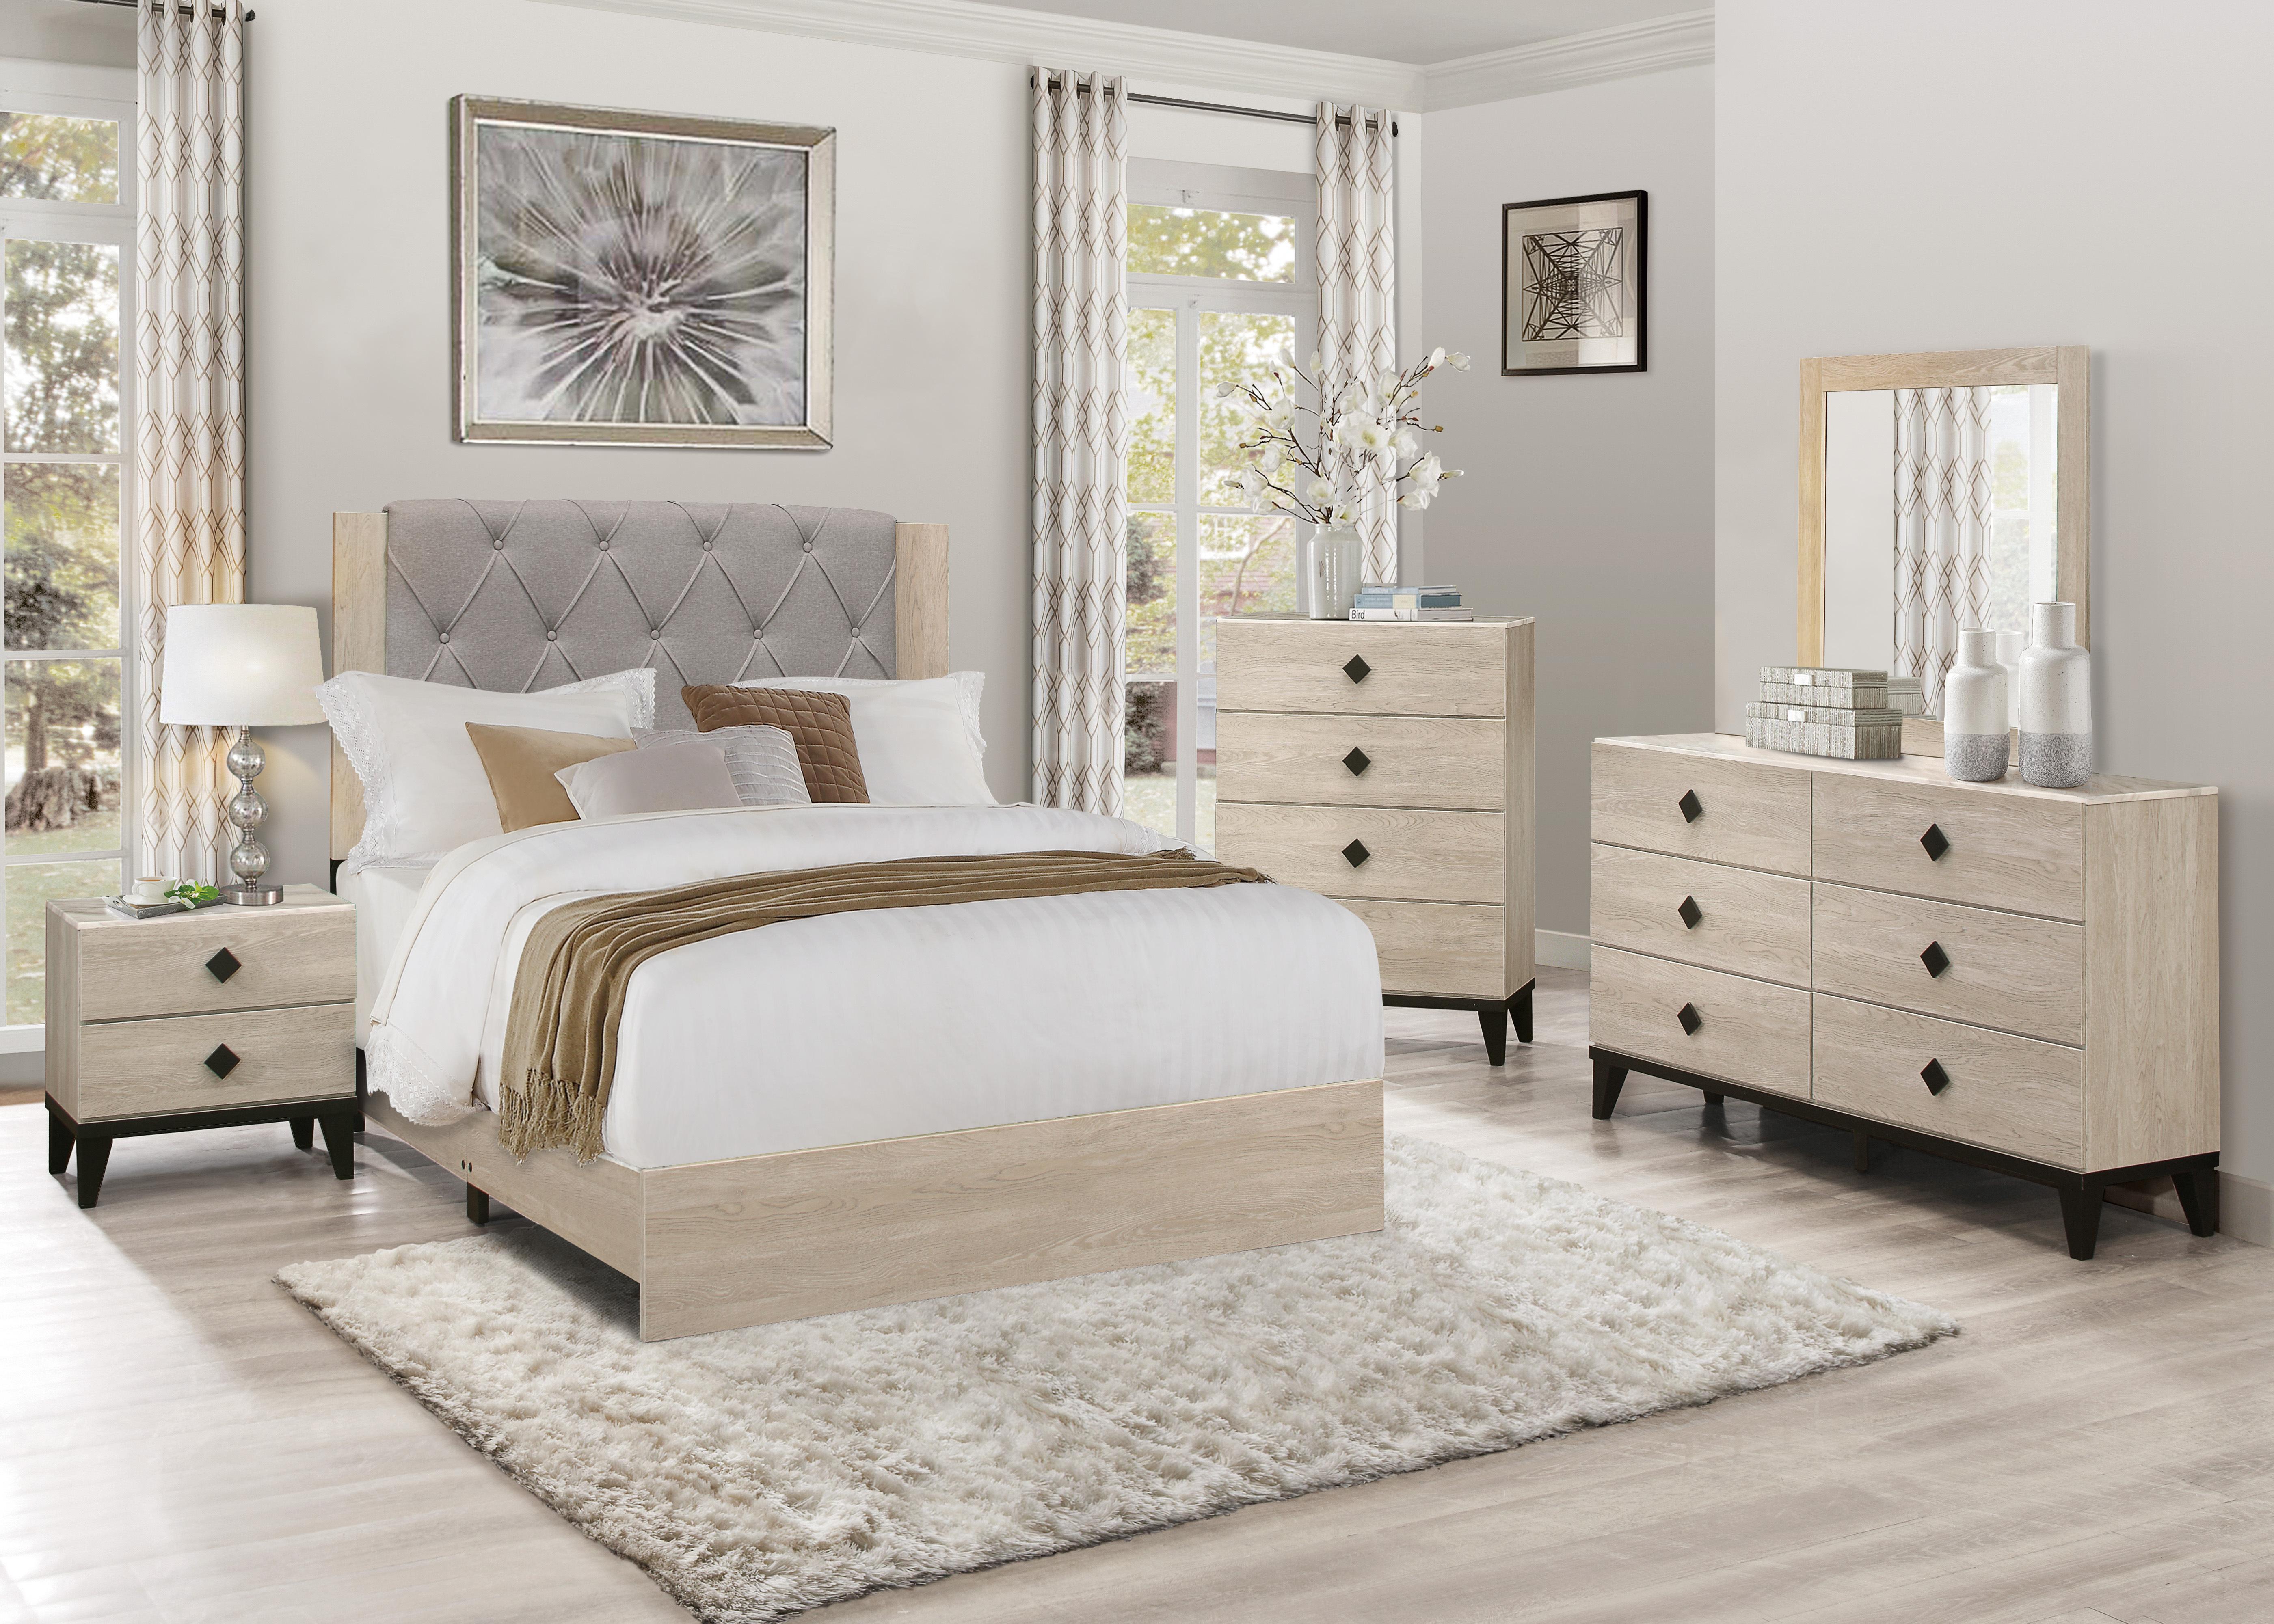 Modern Bedroom Set 1524-1-6PC Whiting 1524-1-6PC in Cream Polyester